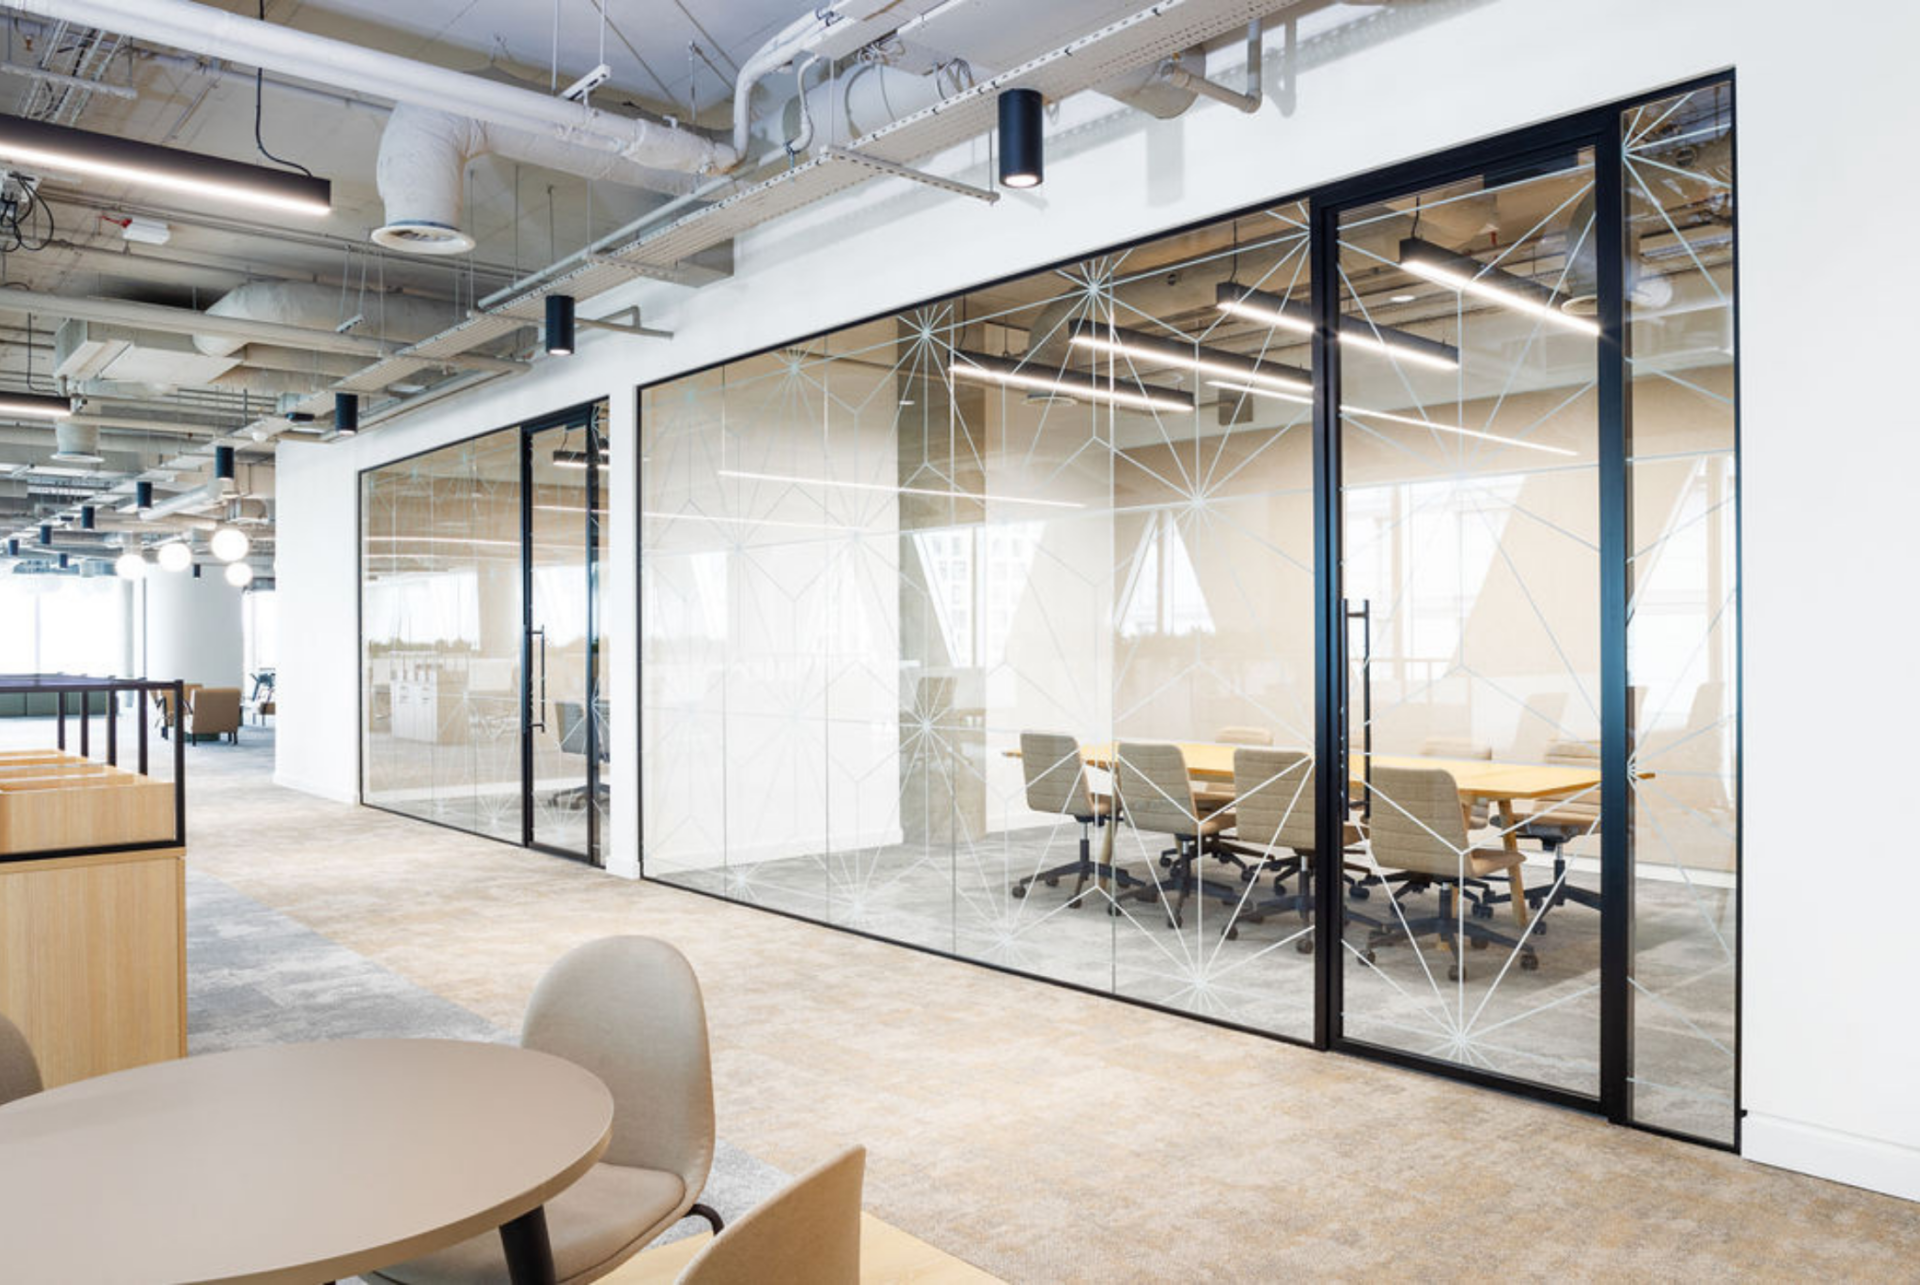 Office meeting rooms behind glass